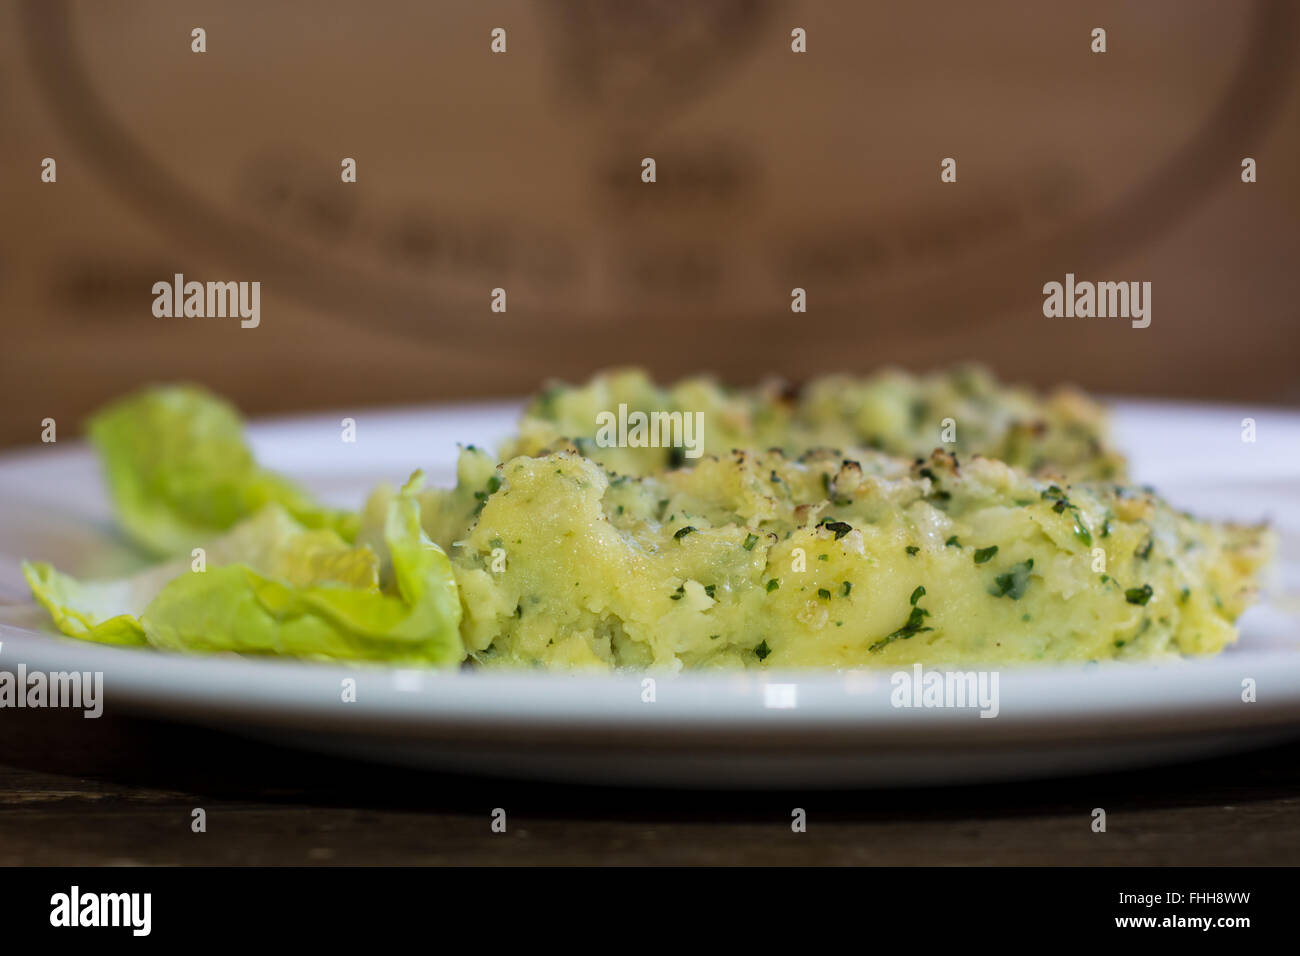 Fish pie on plate from side. Fish pie with potato and herbs served with olive oil and lettuce Stock Photo